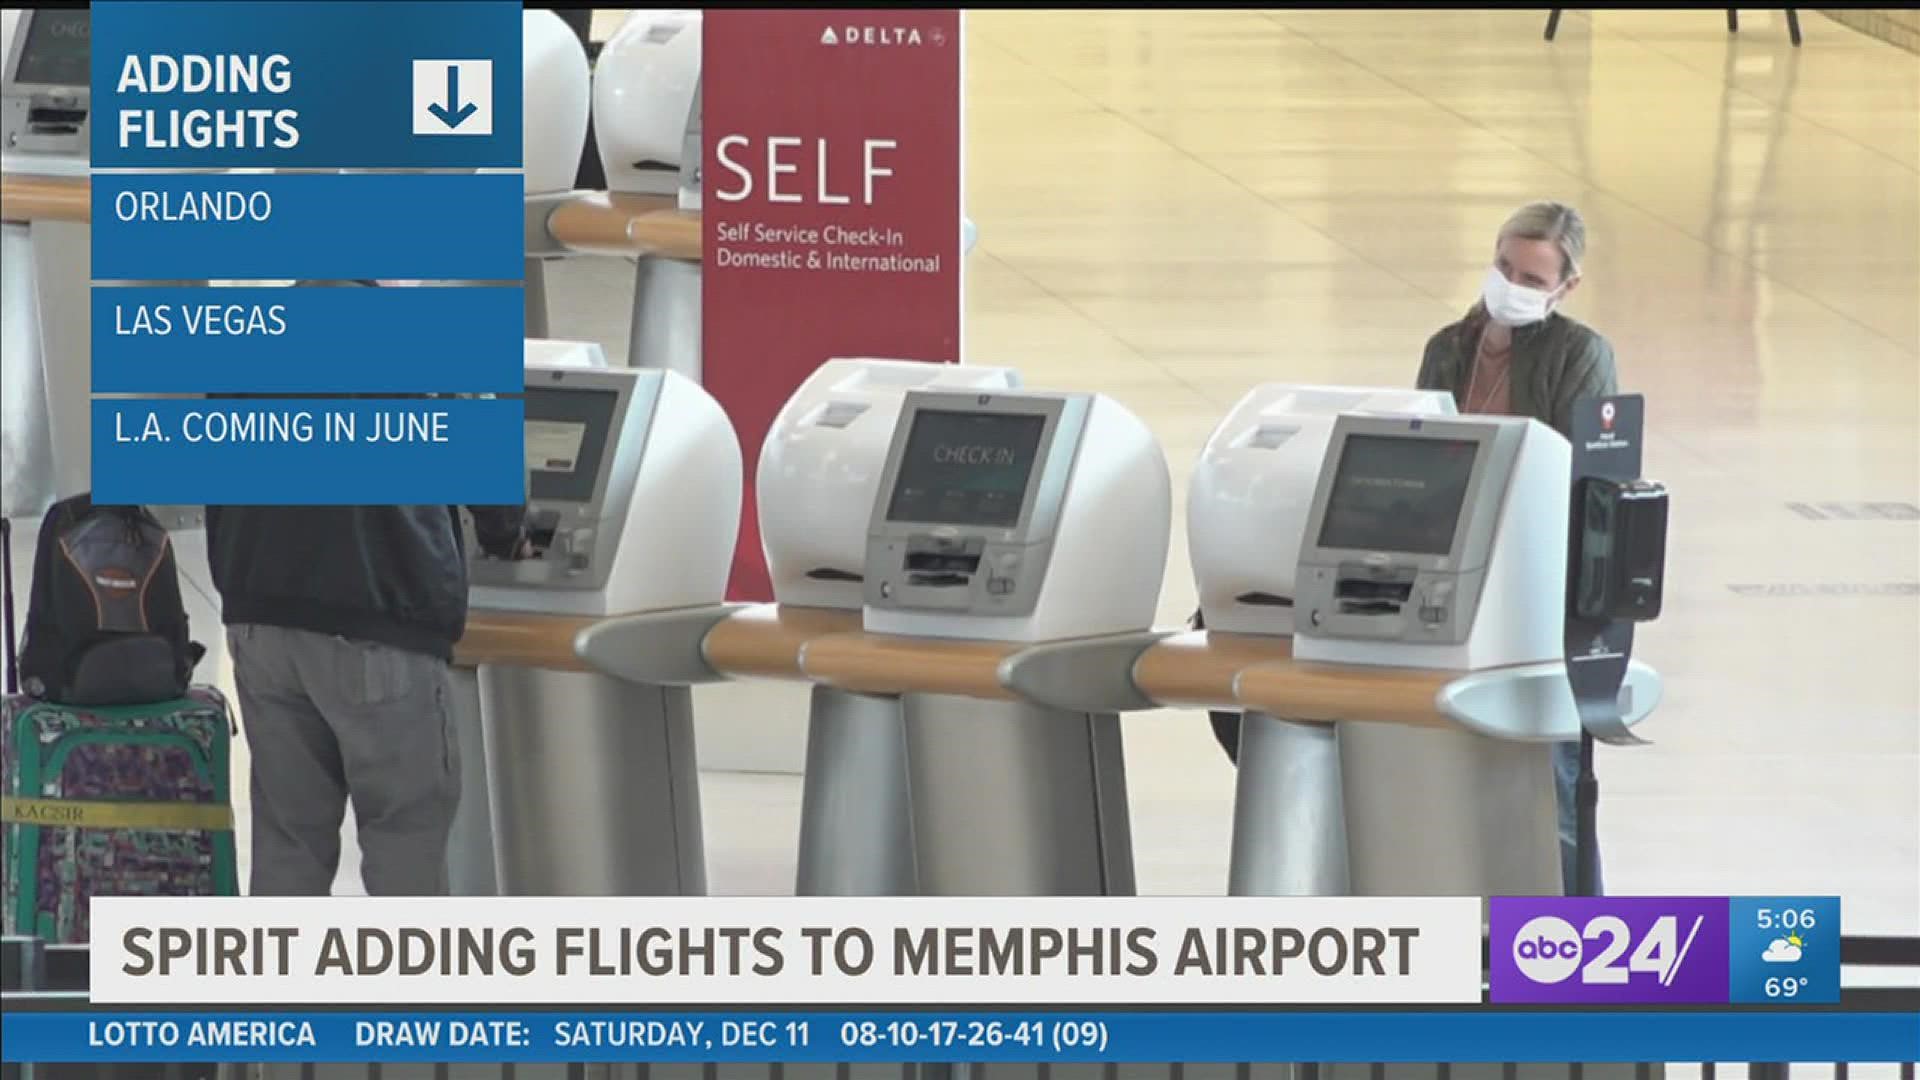 Memphis International Airport Officials and the airline announced daily flights to Las Vegas, Orlando, and Los Angeles beginning next year.